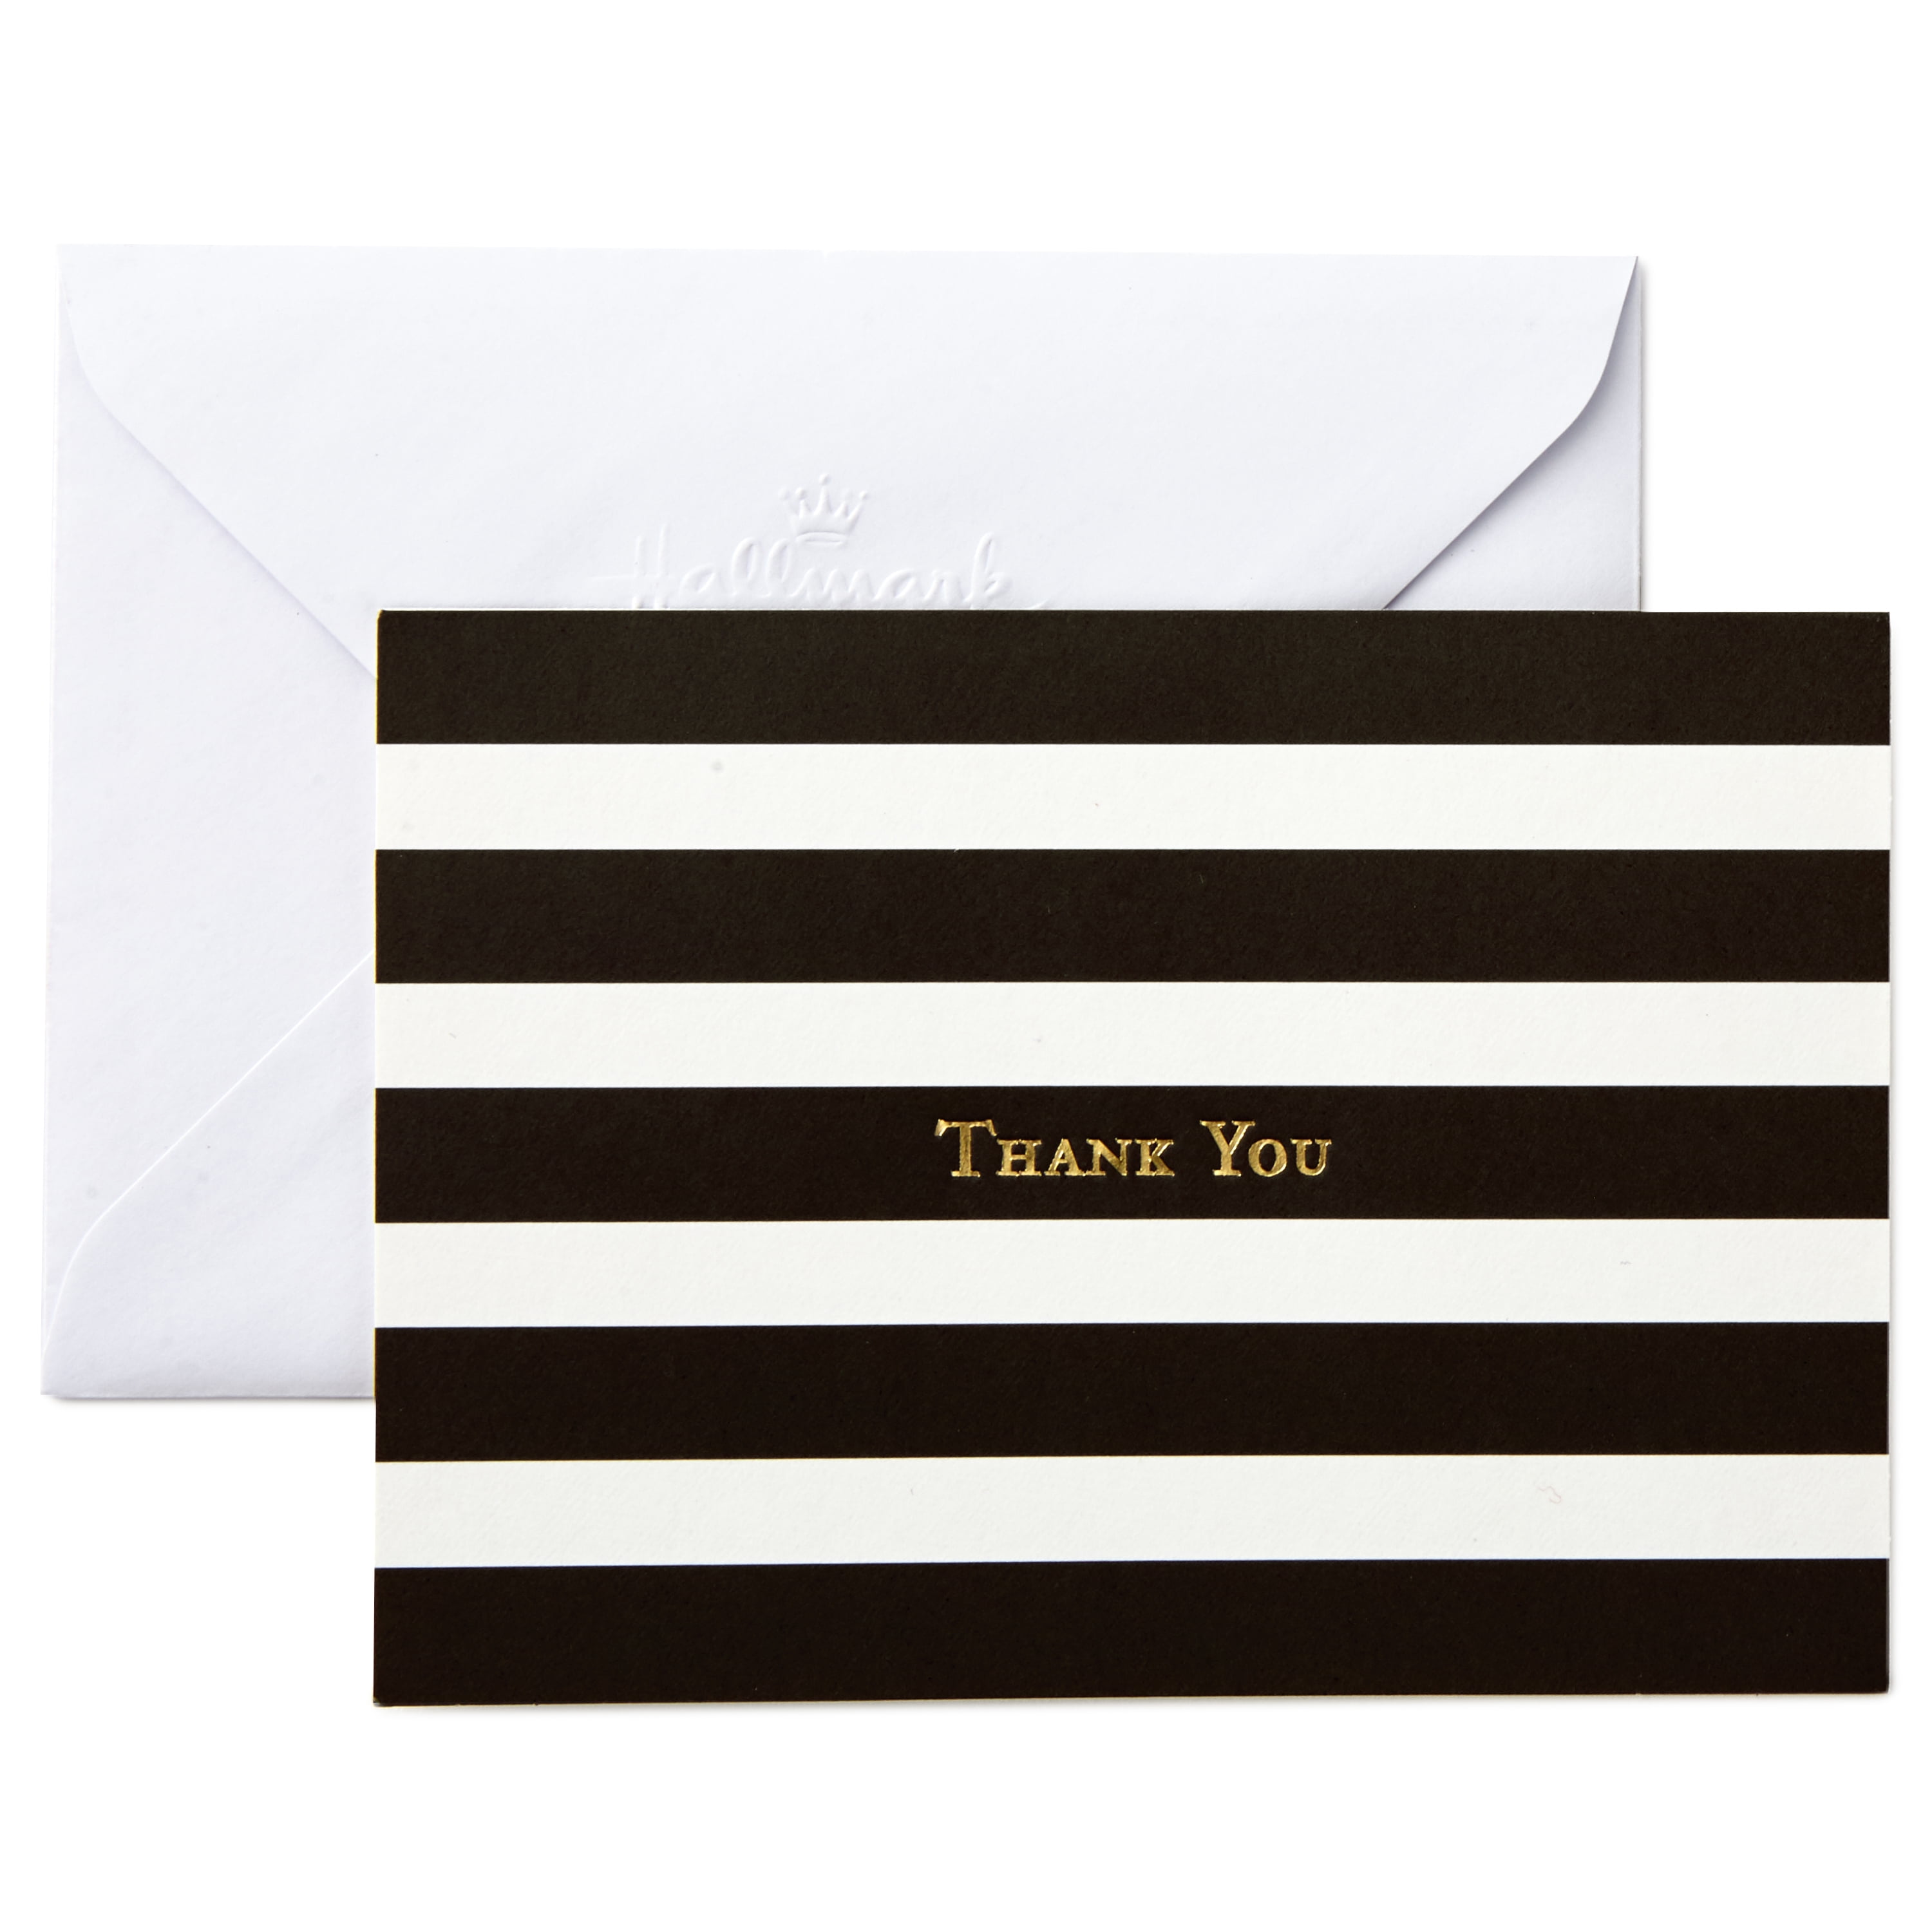 Blank Thank You Cards......6 Cards & Envelopes...By Key Notes 